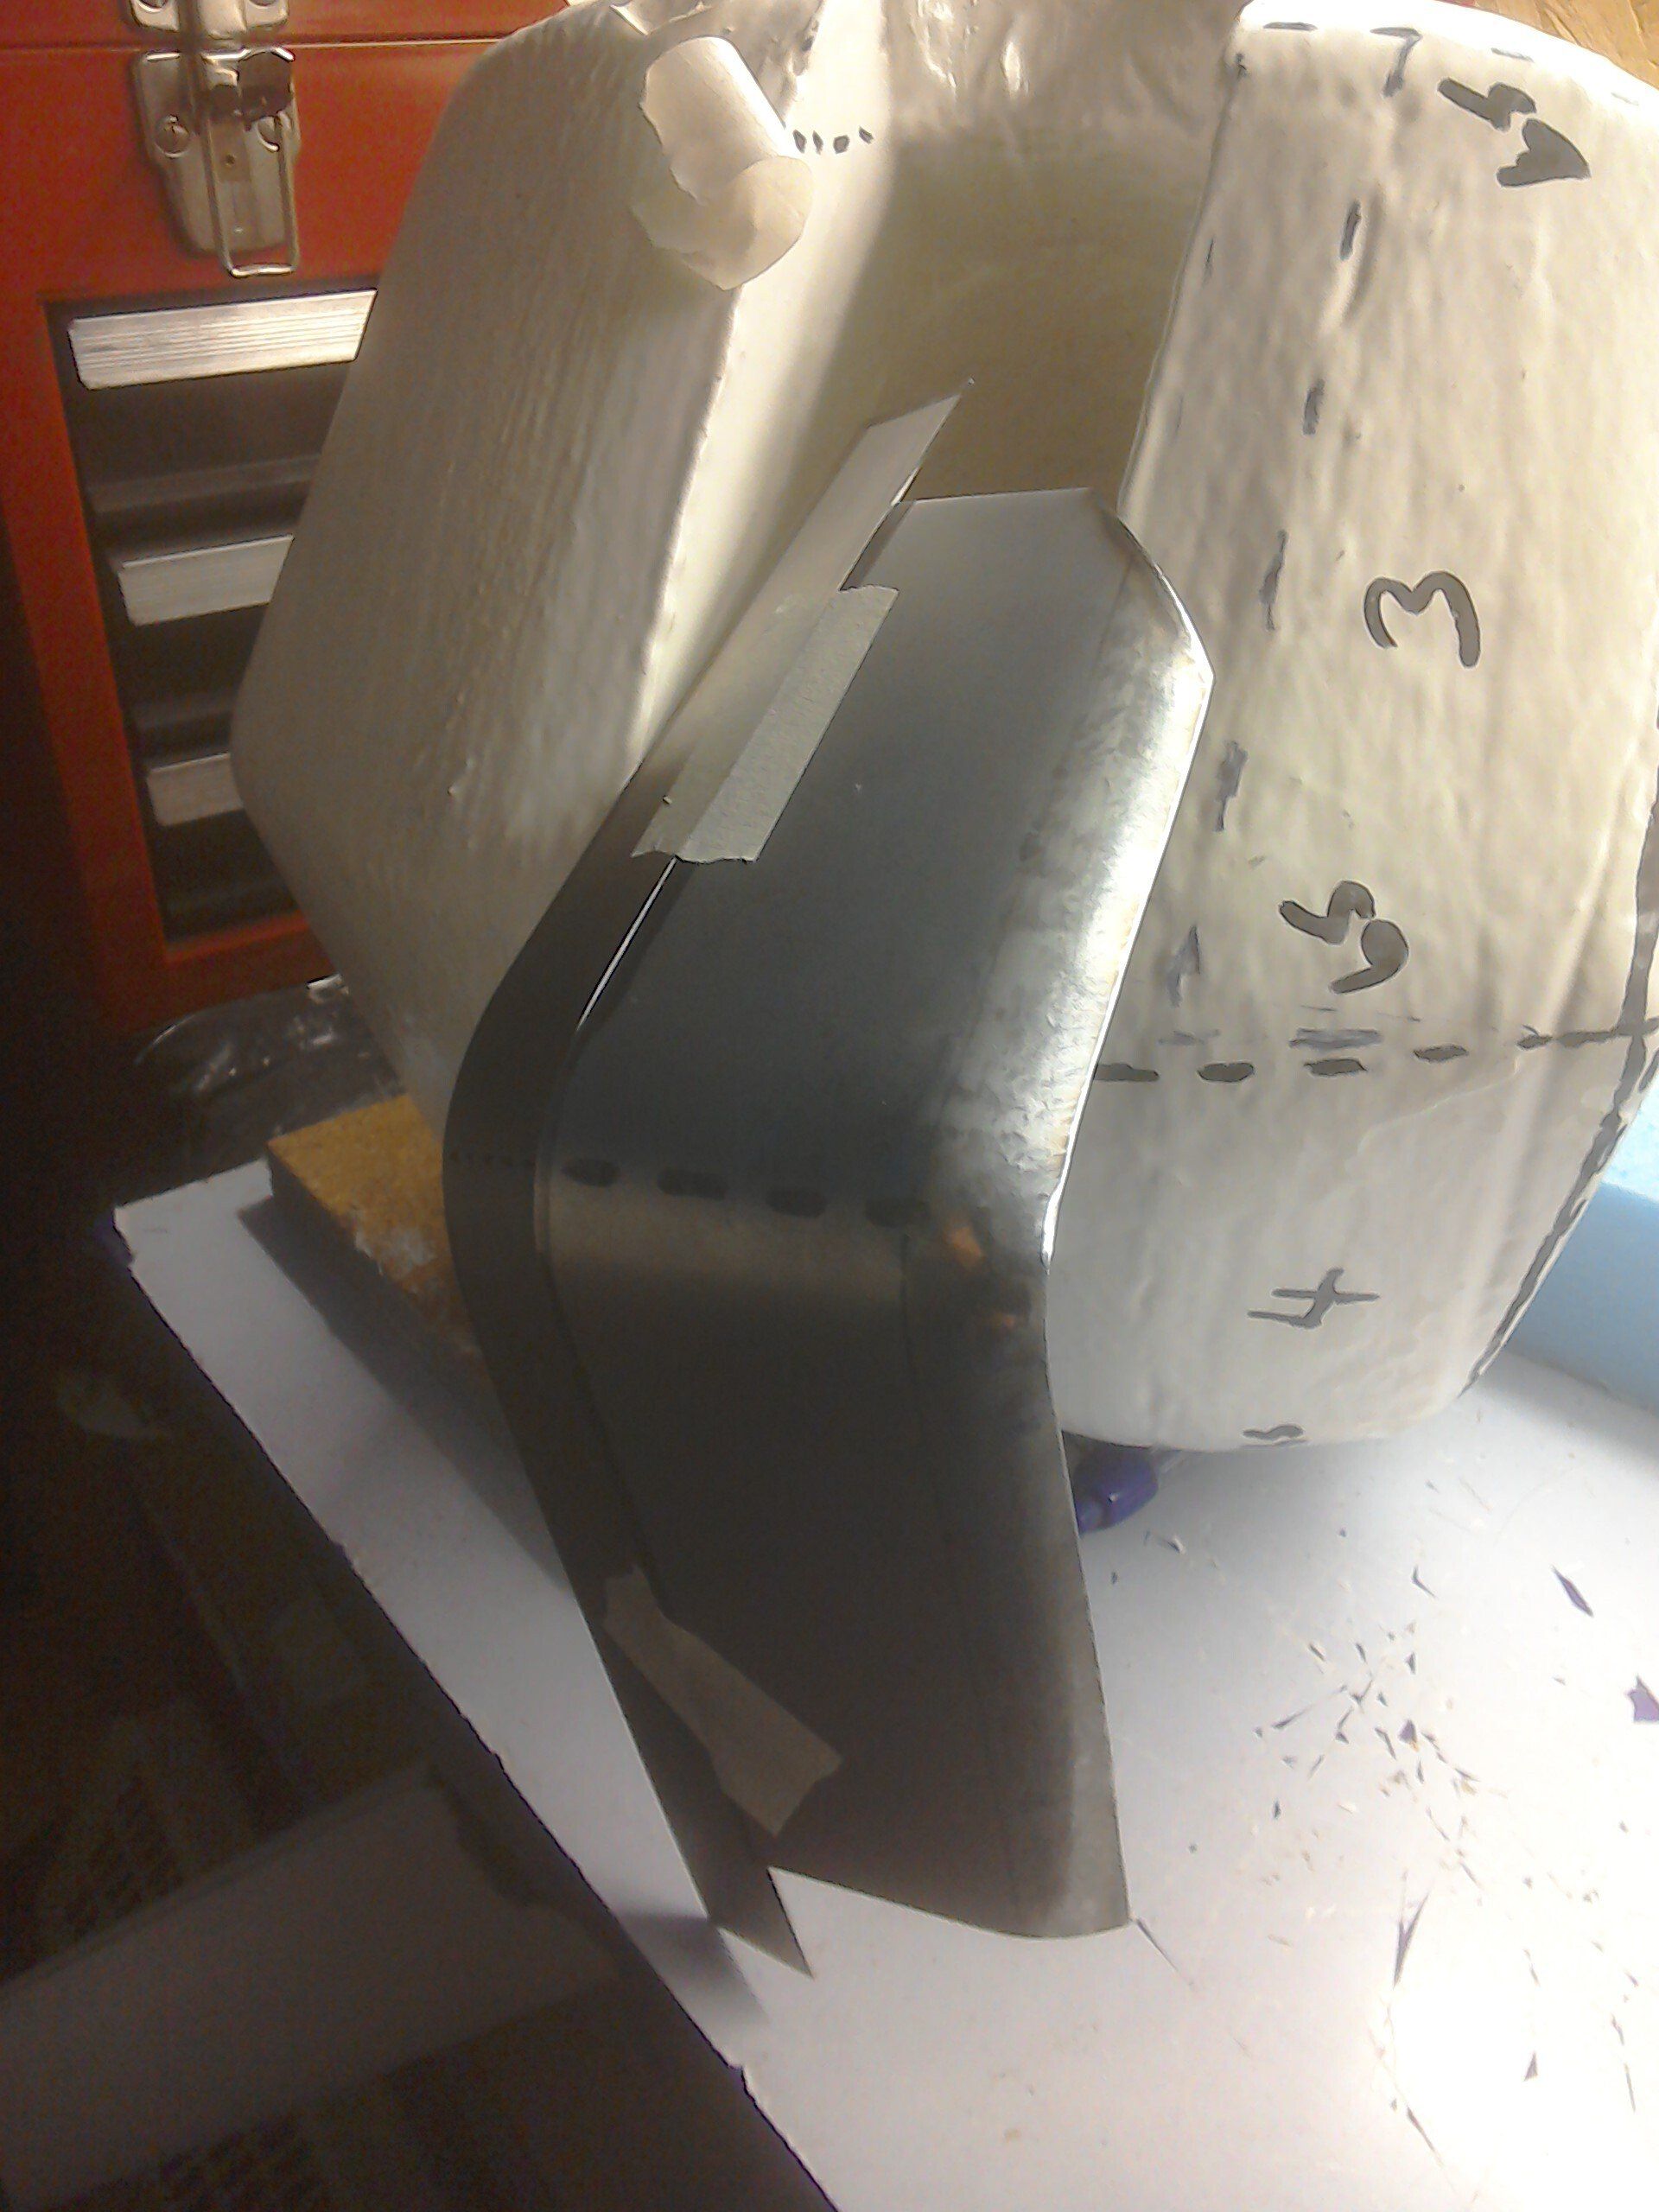 First attempts at sheet metal shaping using hammer and dolly